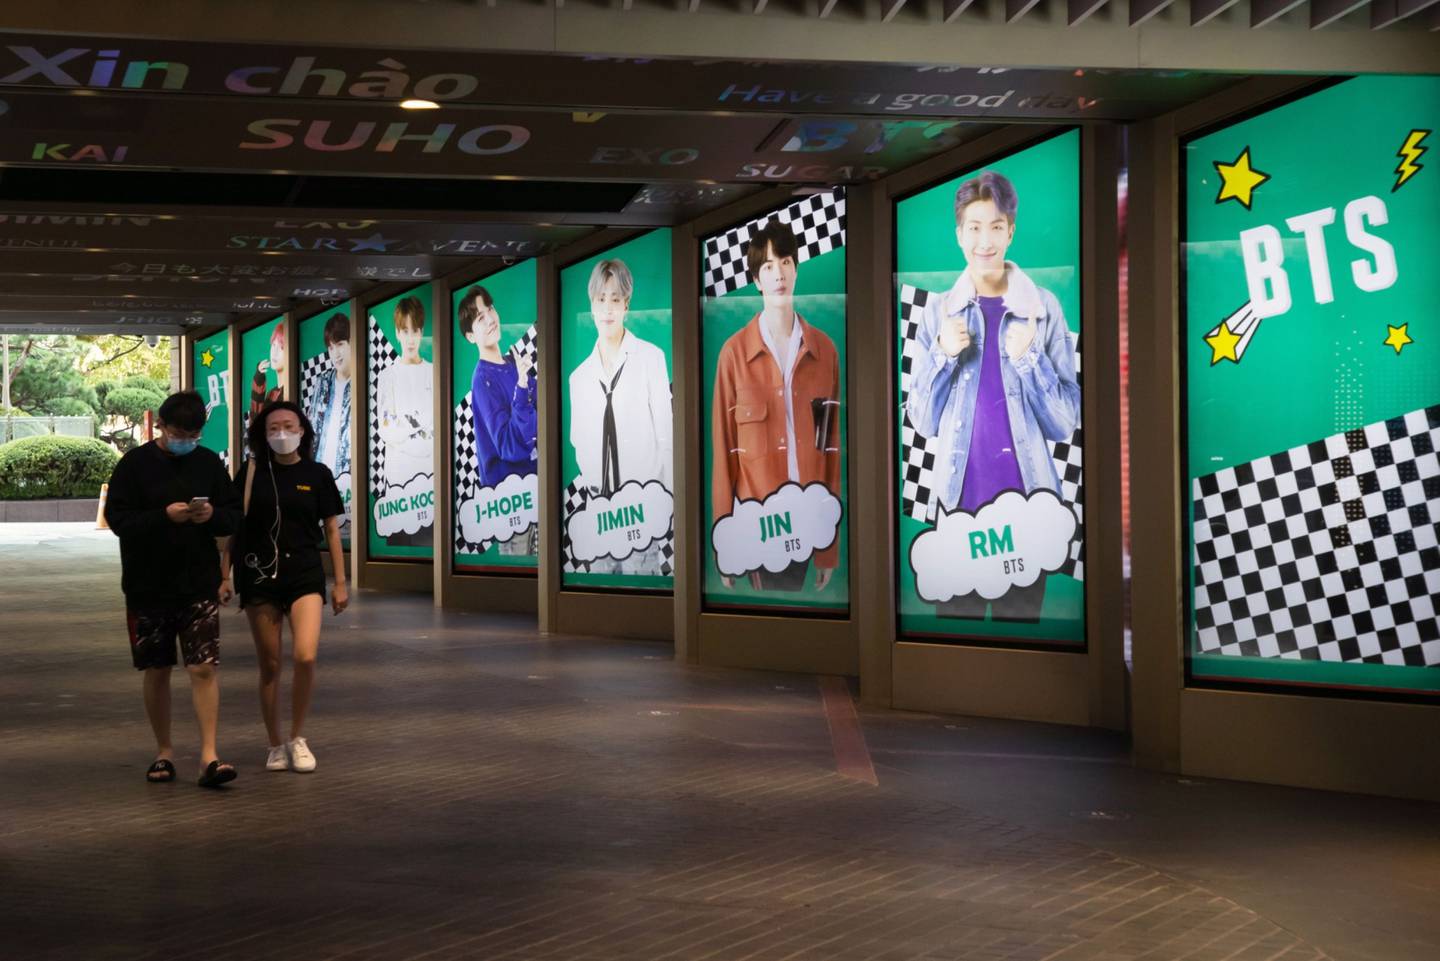 Pedestrians wearing protective masks walk past an advertisement for K-pop boy band BTS displayed in Seoul, South Korea, on Friday, Sept. 18. 2020. Big Hit Entertainment Co., the manager of K-pop boy band BTS, is looking to raise as much as 962.6 billion won ($812 million) in a South Korean initial public offering that is set to be the countrys largest in three years. Photographer: SeongJoon Cho/Bloombergdfd